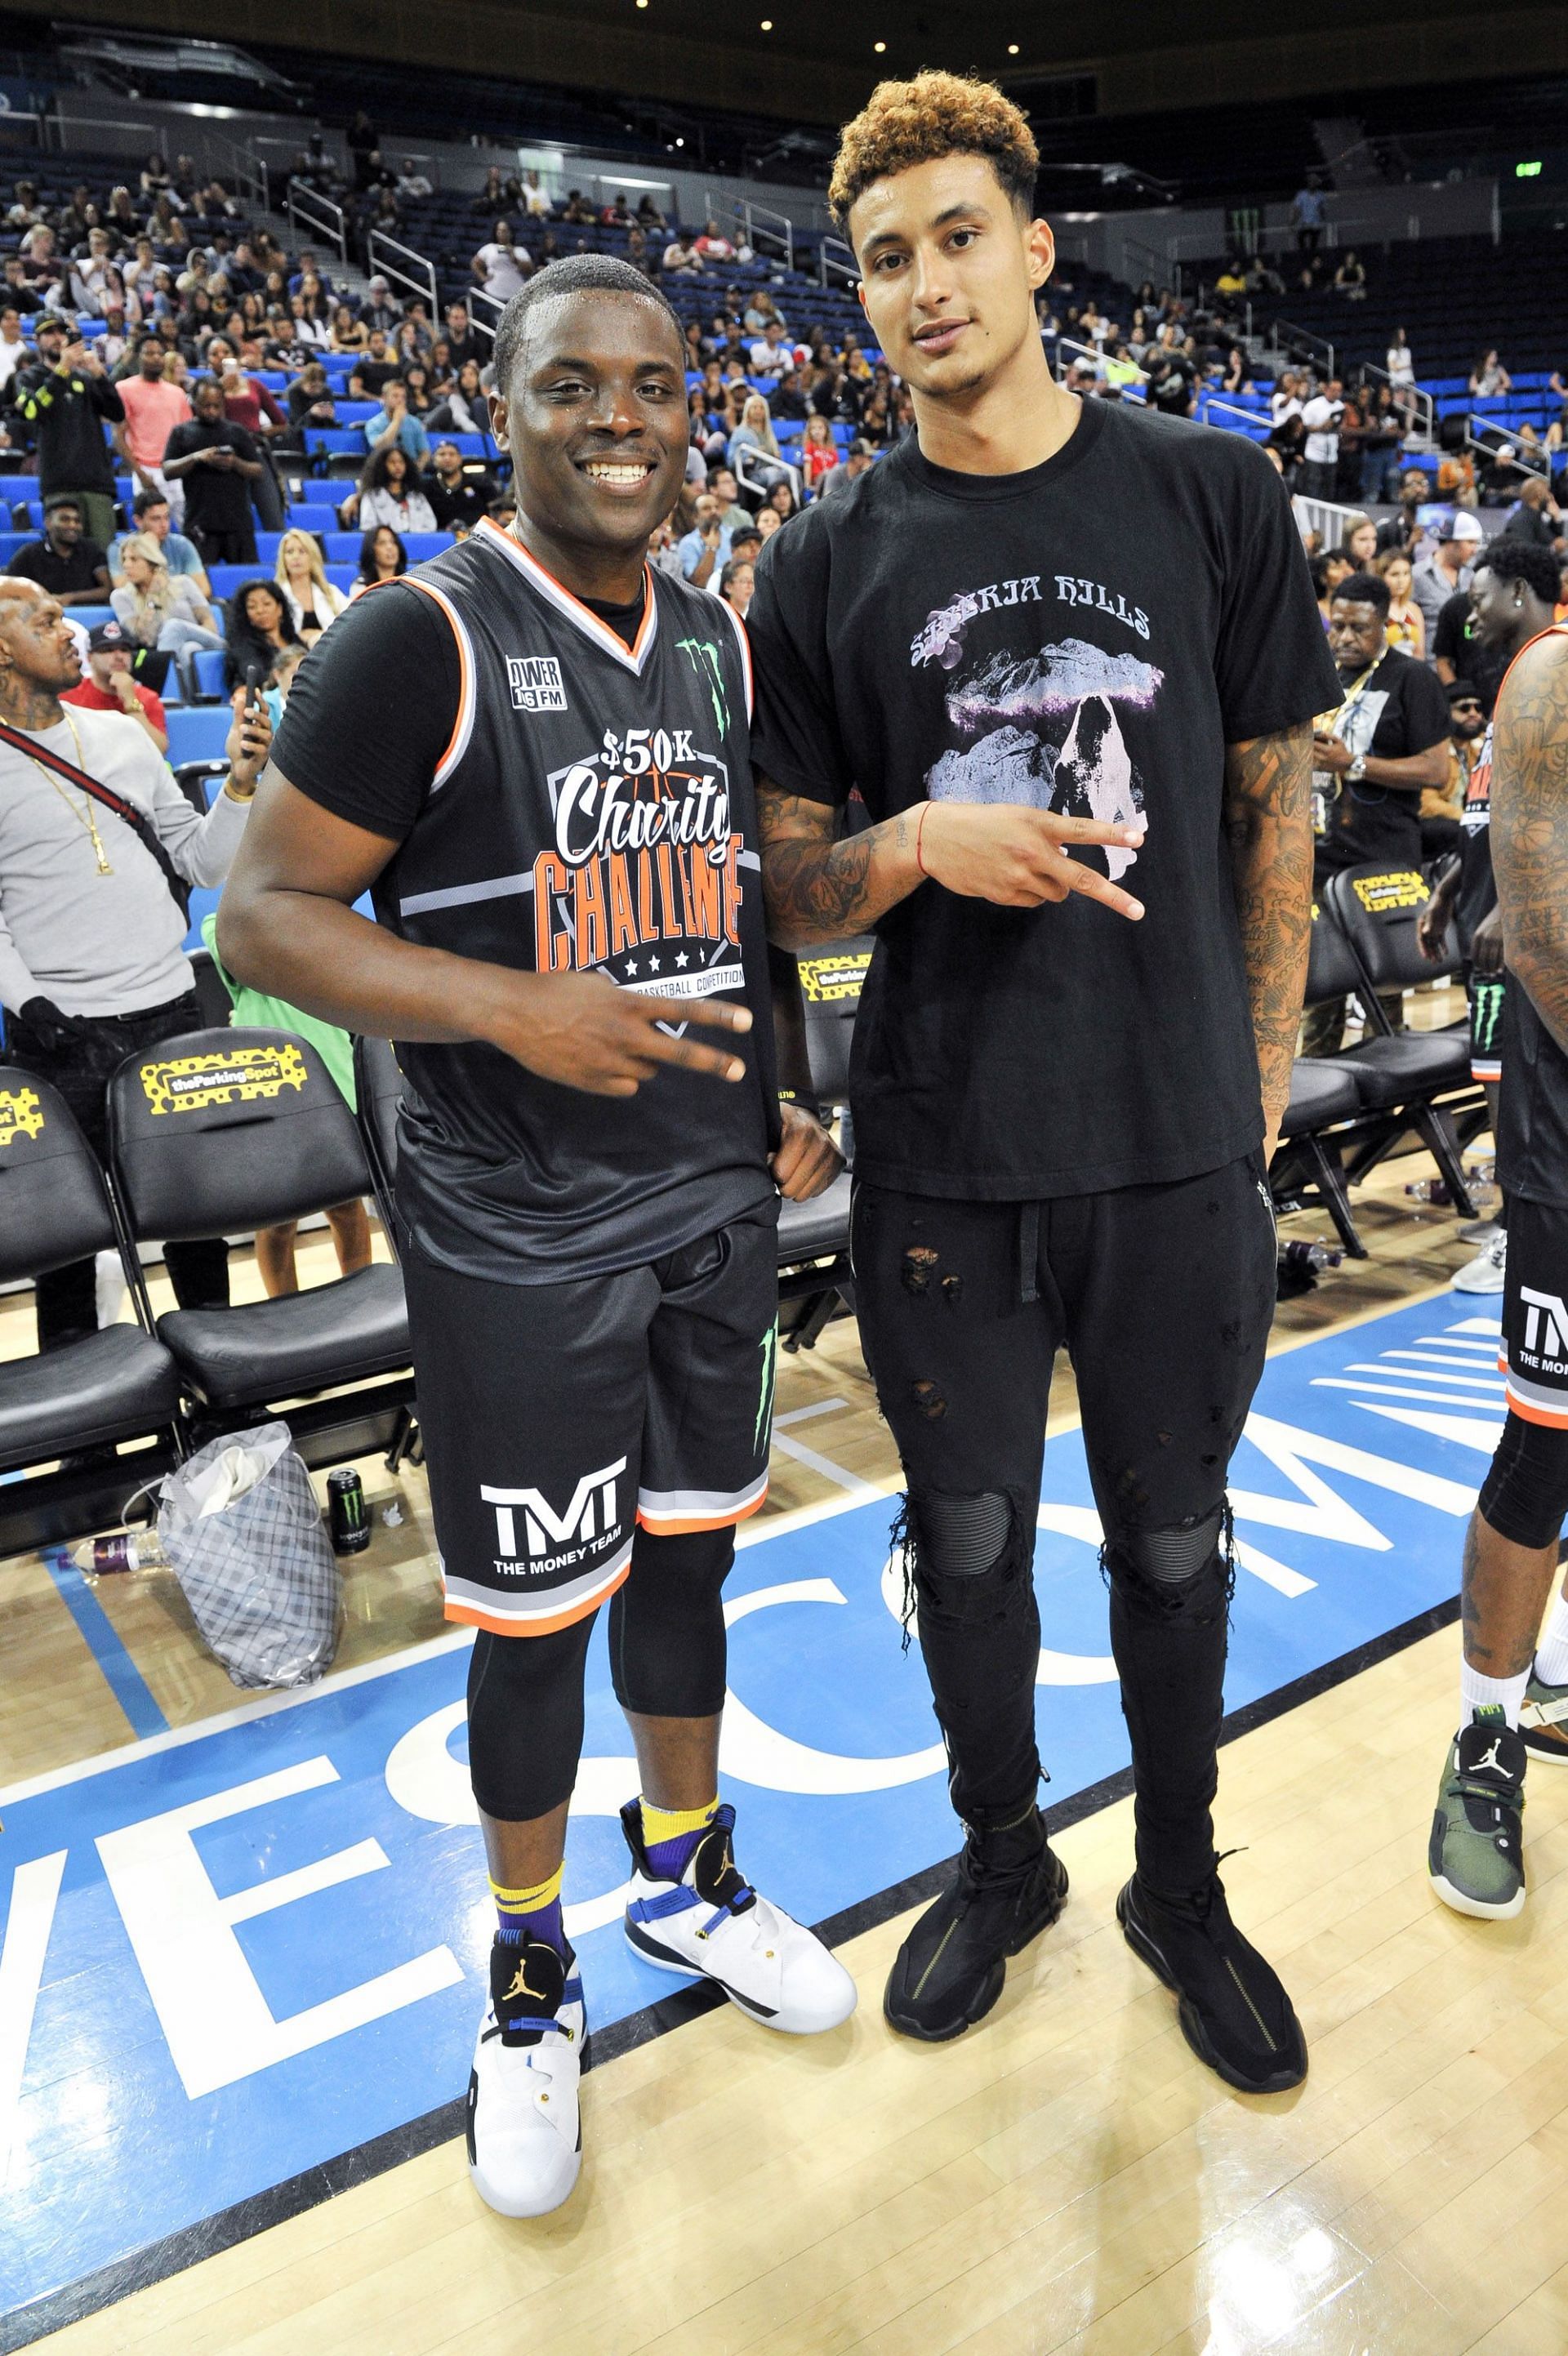 Lethal Shooter (L) and Kyle Kuzma attend the Monster Energy $50K Charity Challenge Celebrity Basketball Game at UCLA&#039;s Pauley Pavilion on July 08, 2019 in Westwood, California.